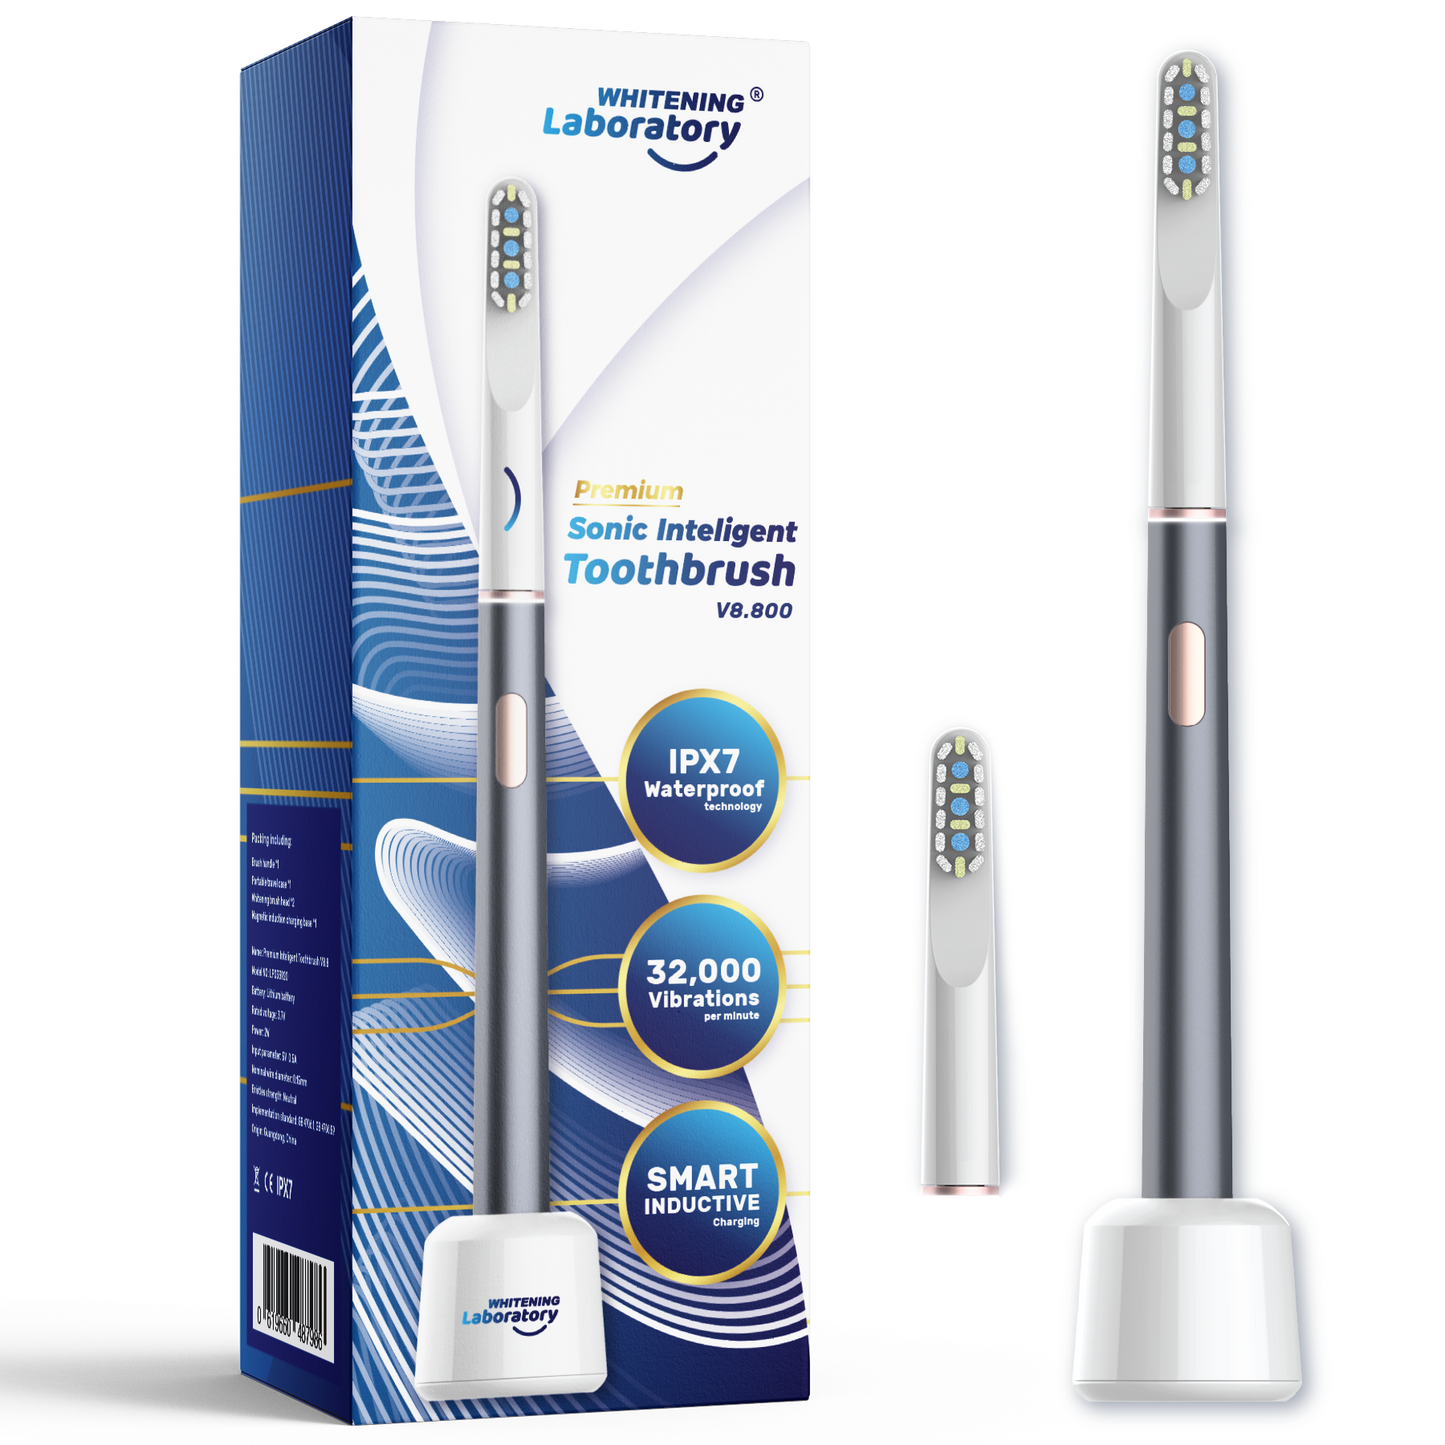 Whitening Laboratory's sonic toothbrush next to its portable travel box and induction charging base, emphasizing convenience and advanced technology.